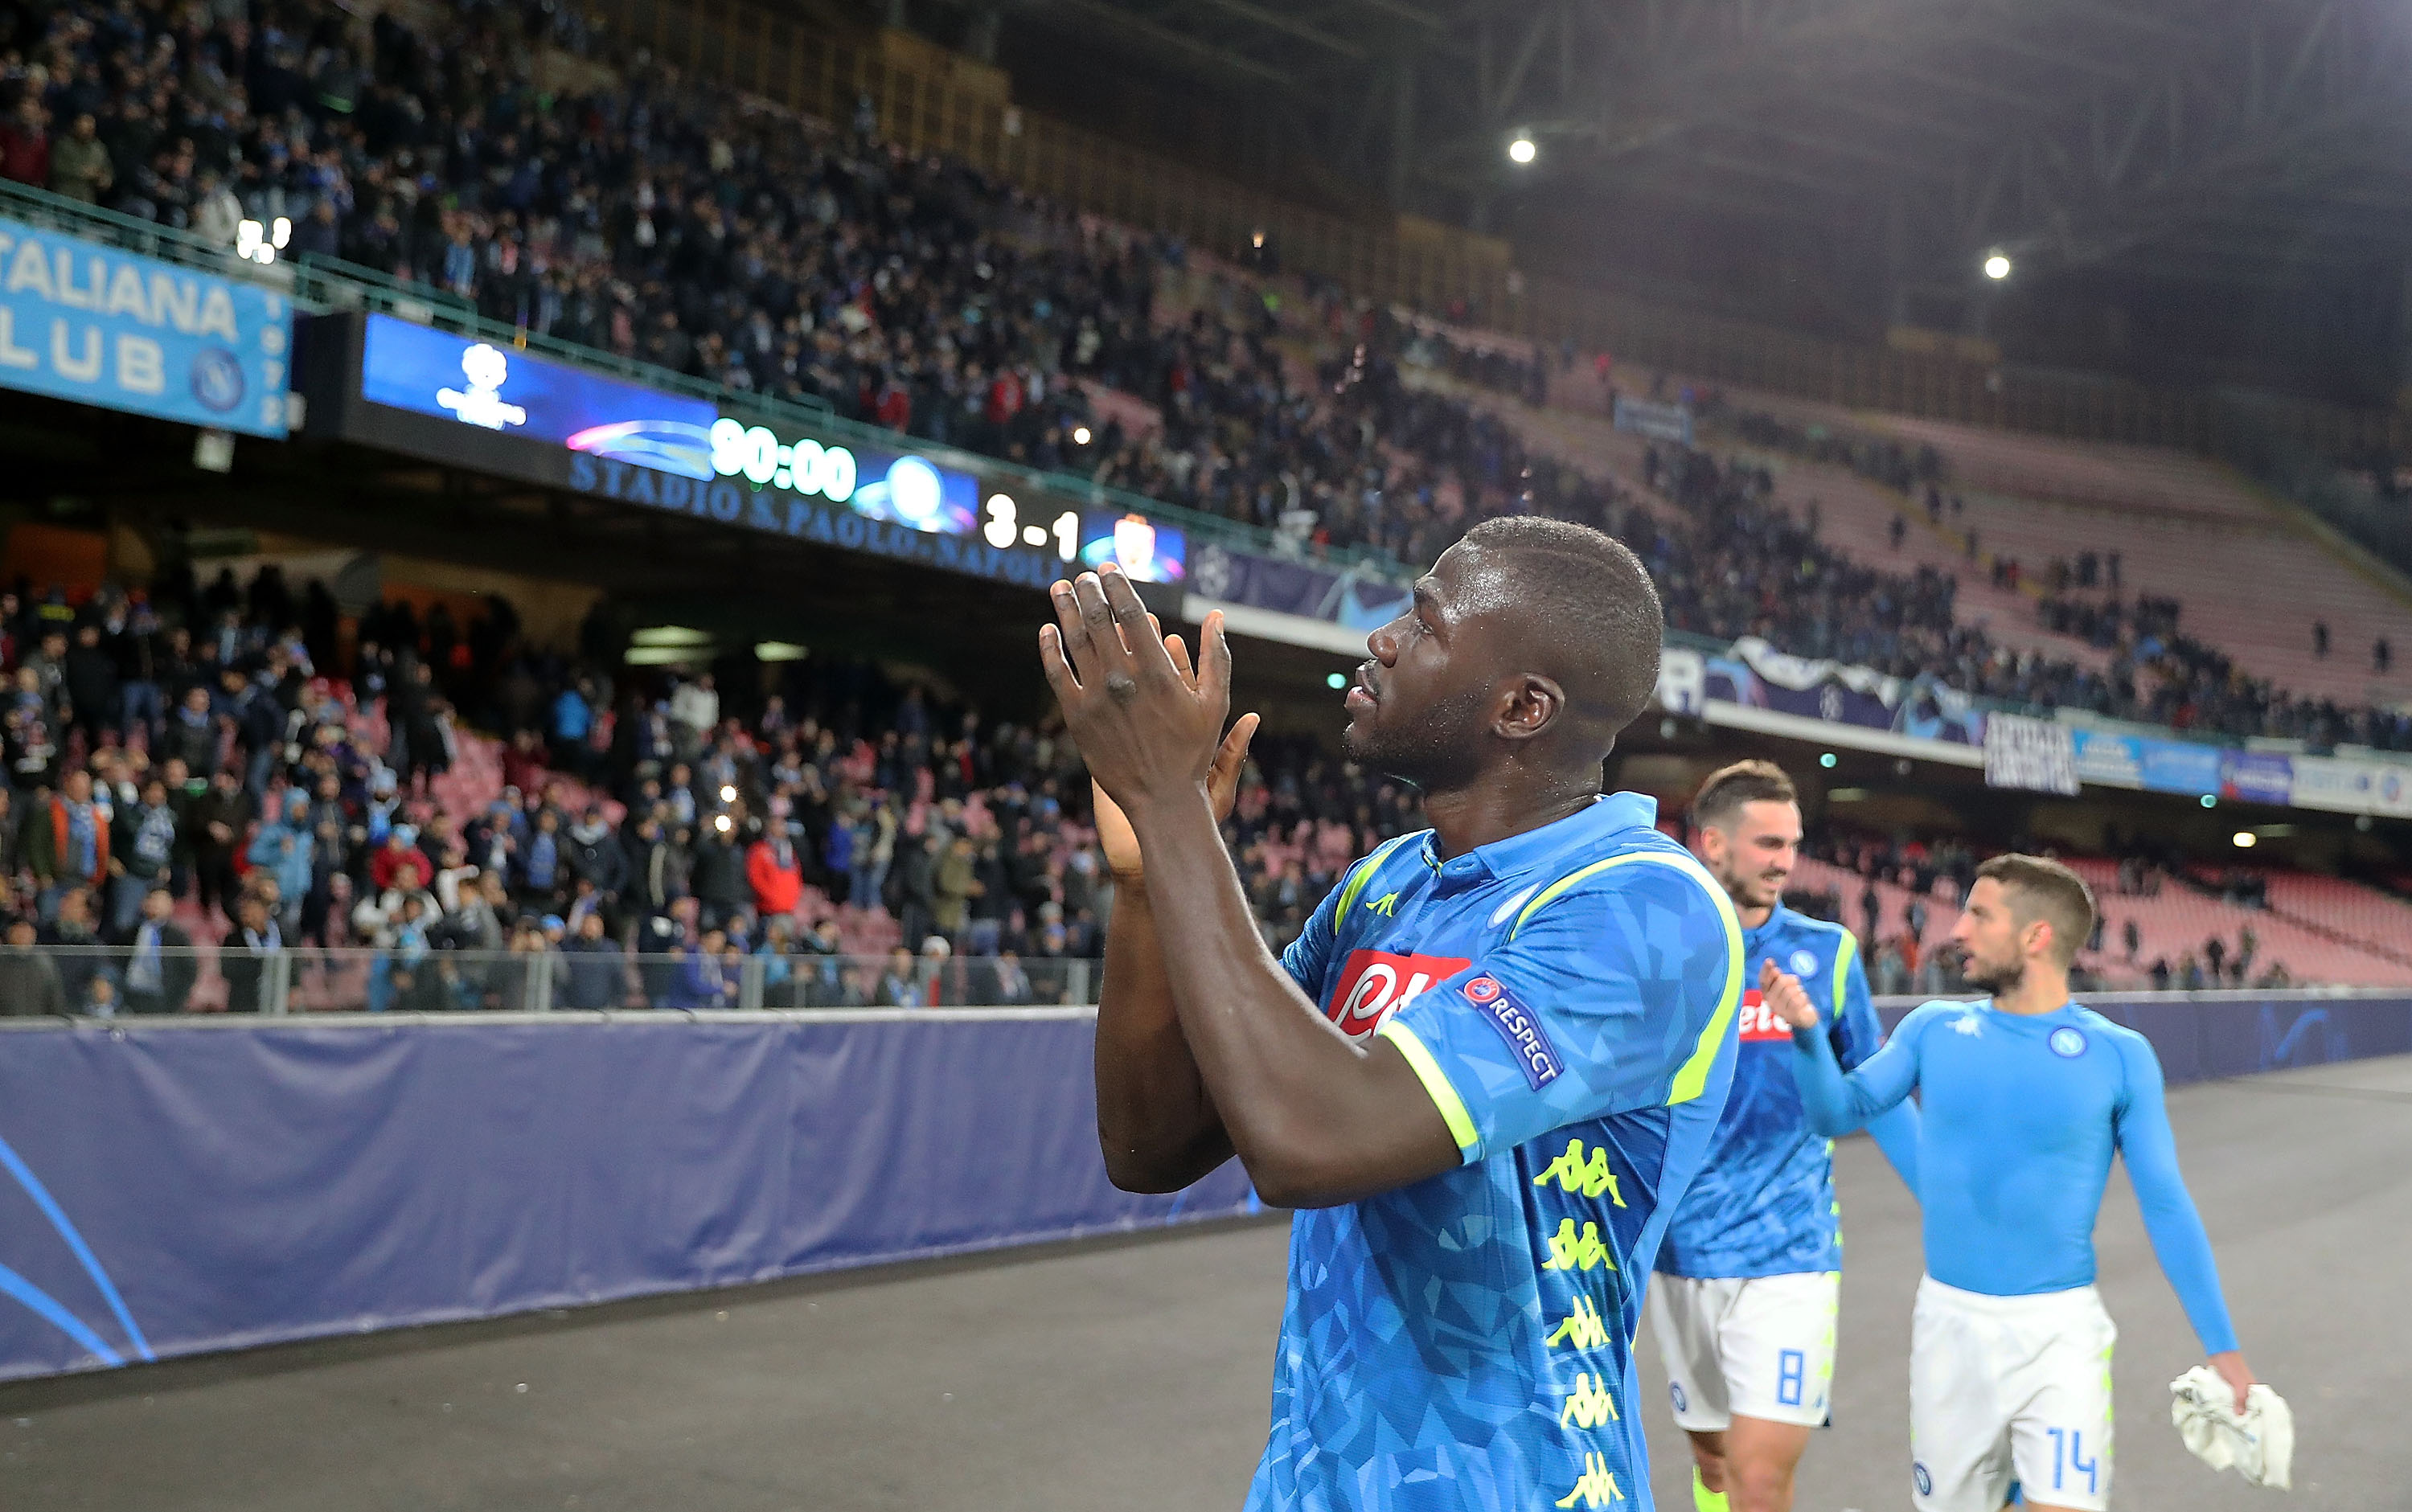 NAPLES, ITALY - NOVEMBER 28:  Kalidou Koulibaly player of SSC Napoli celebrates the victory after the Group C match of the UEFA Champions League between SSC Napoli and Red Star Belgrade at Stadio San Paolo on November 28, 2018 in Naples, Italy.  (Photo by Francesco Pecoraro/Getty Images)